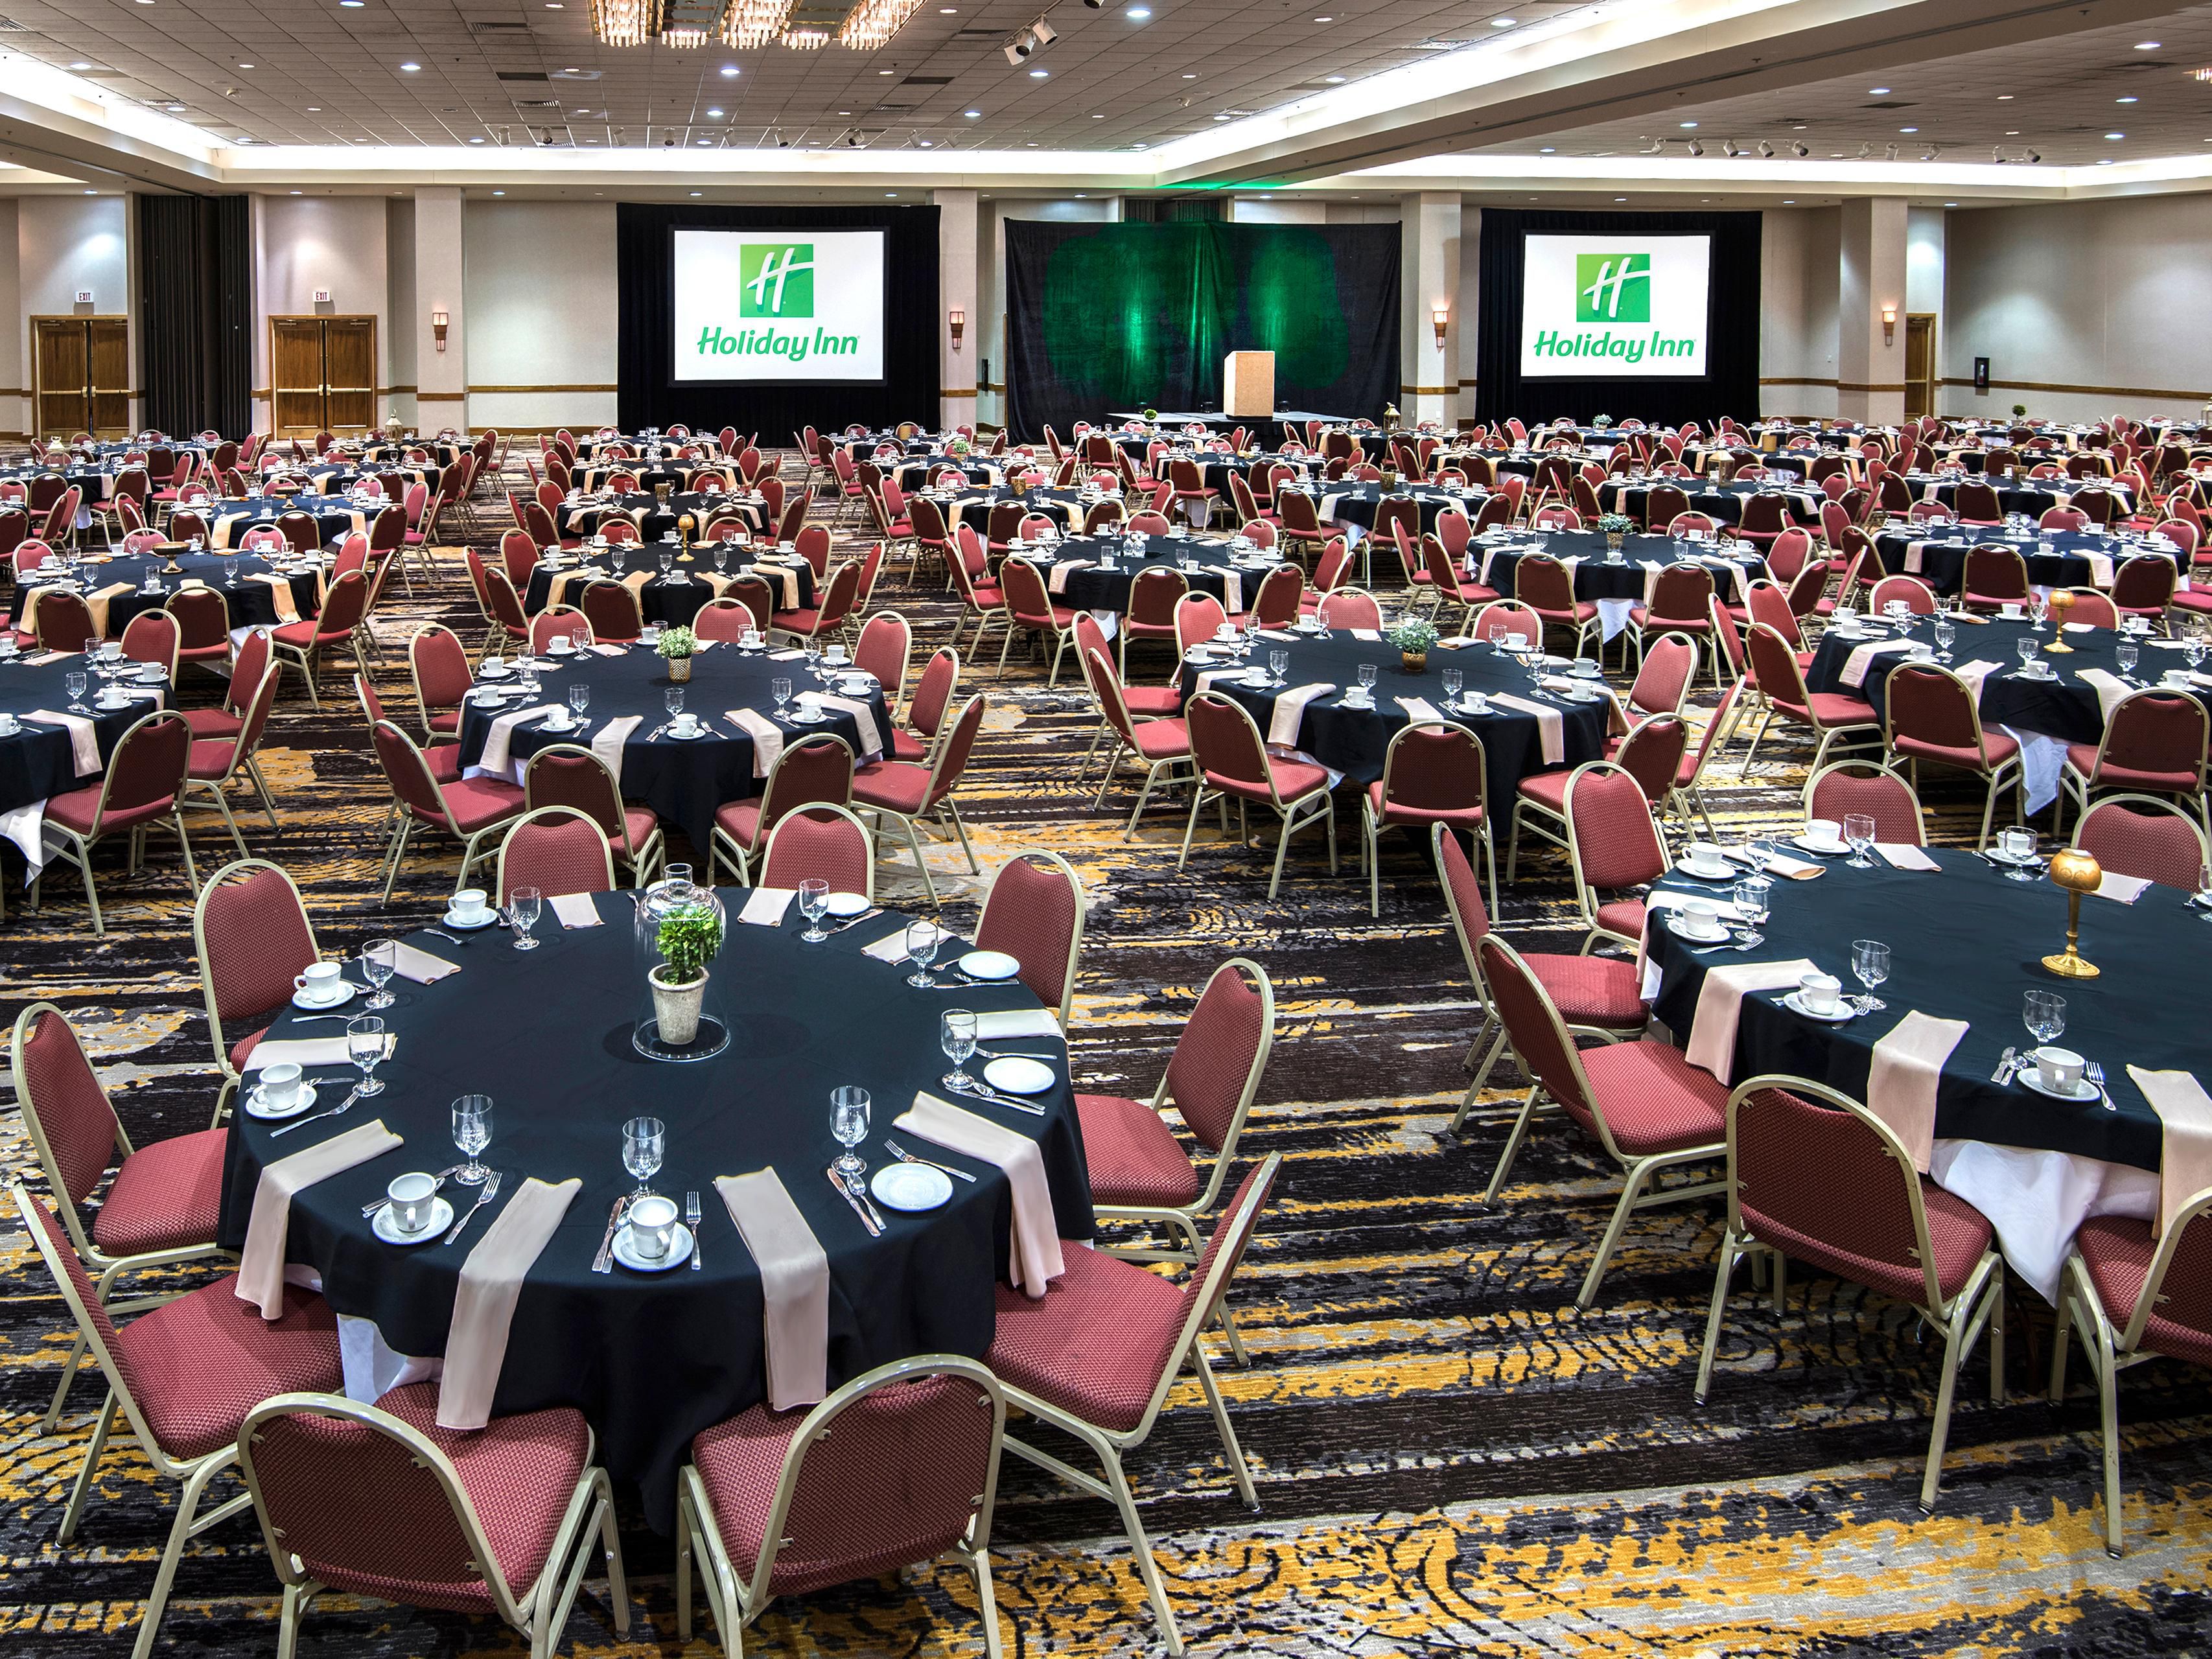 With 61,000 square feet, our Springdale, AR hotel's meeting spaces are the best choice for events in northwest Arkansas. Reunions, meetings, wedding receptions and other social events are more fun with the help of our professional staff.